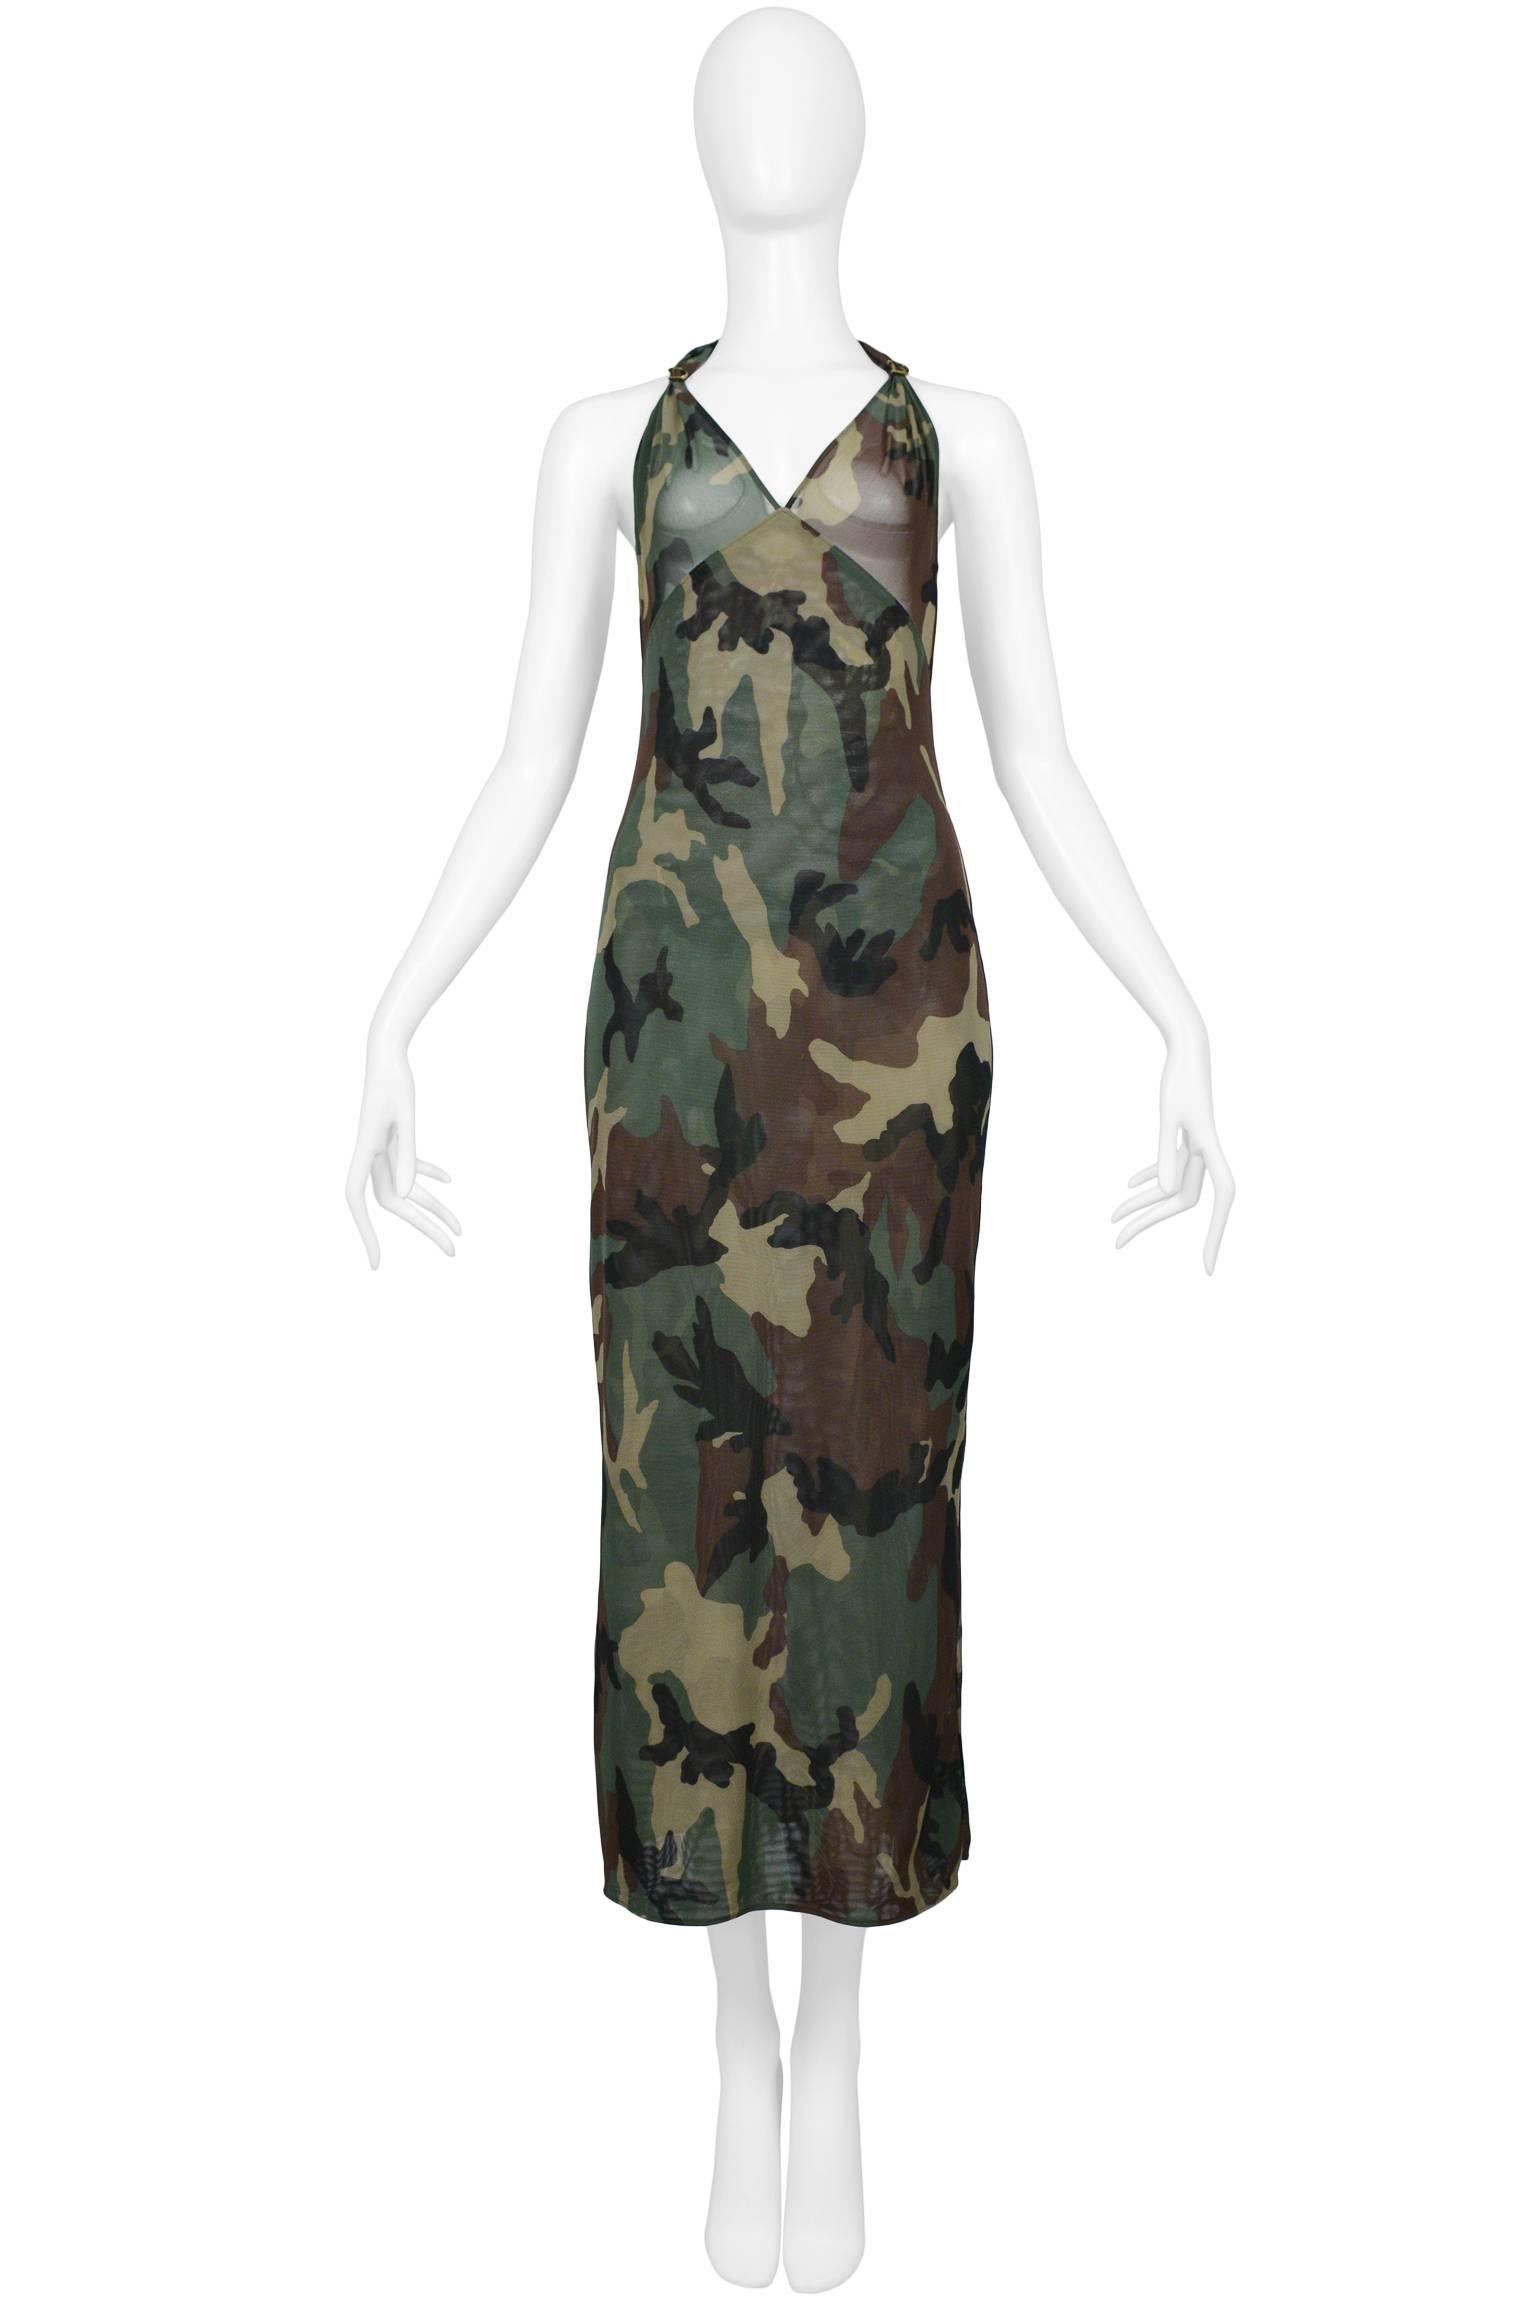 Christian Dior by John Galliano camouflage mesh halter gown with